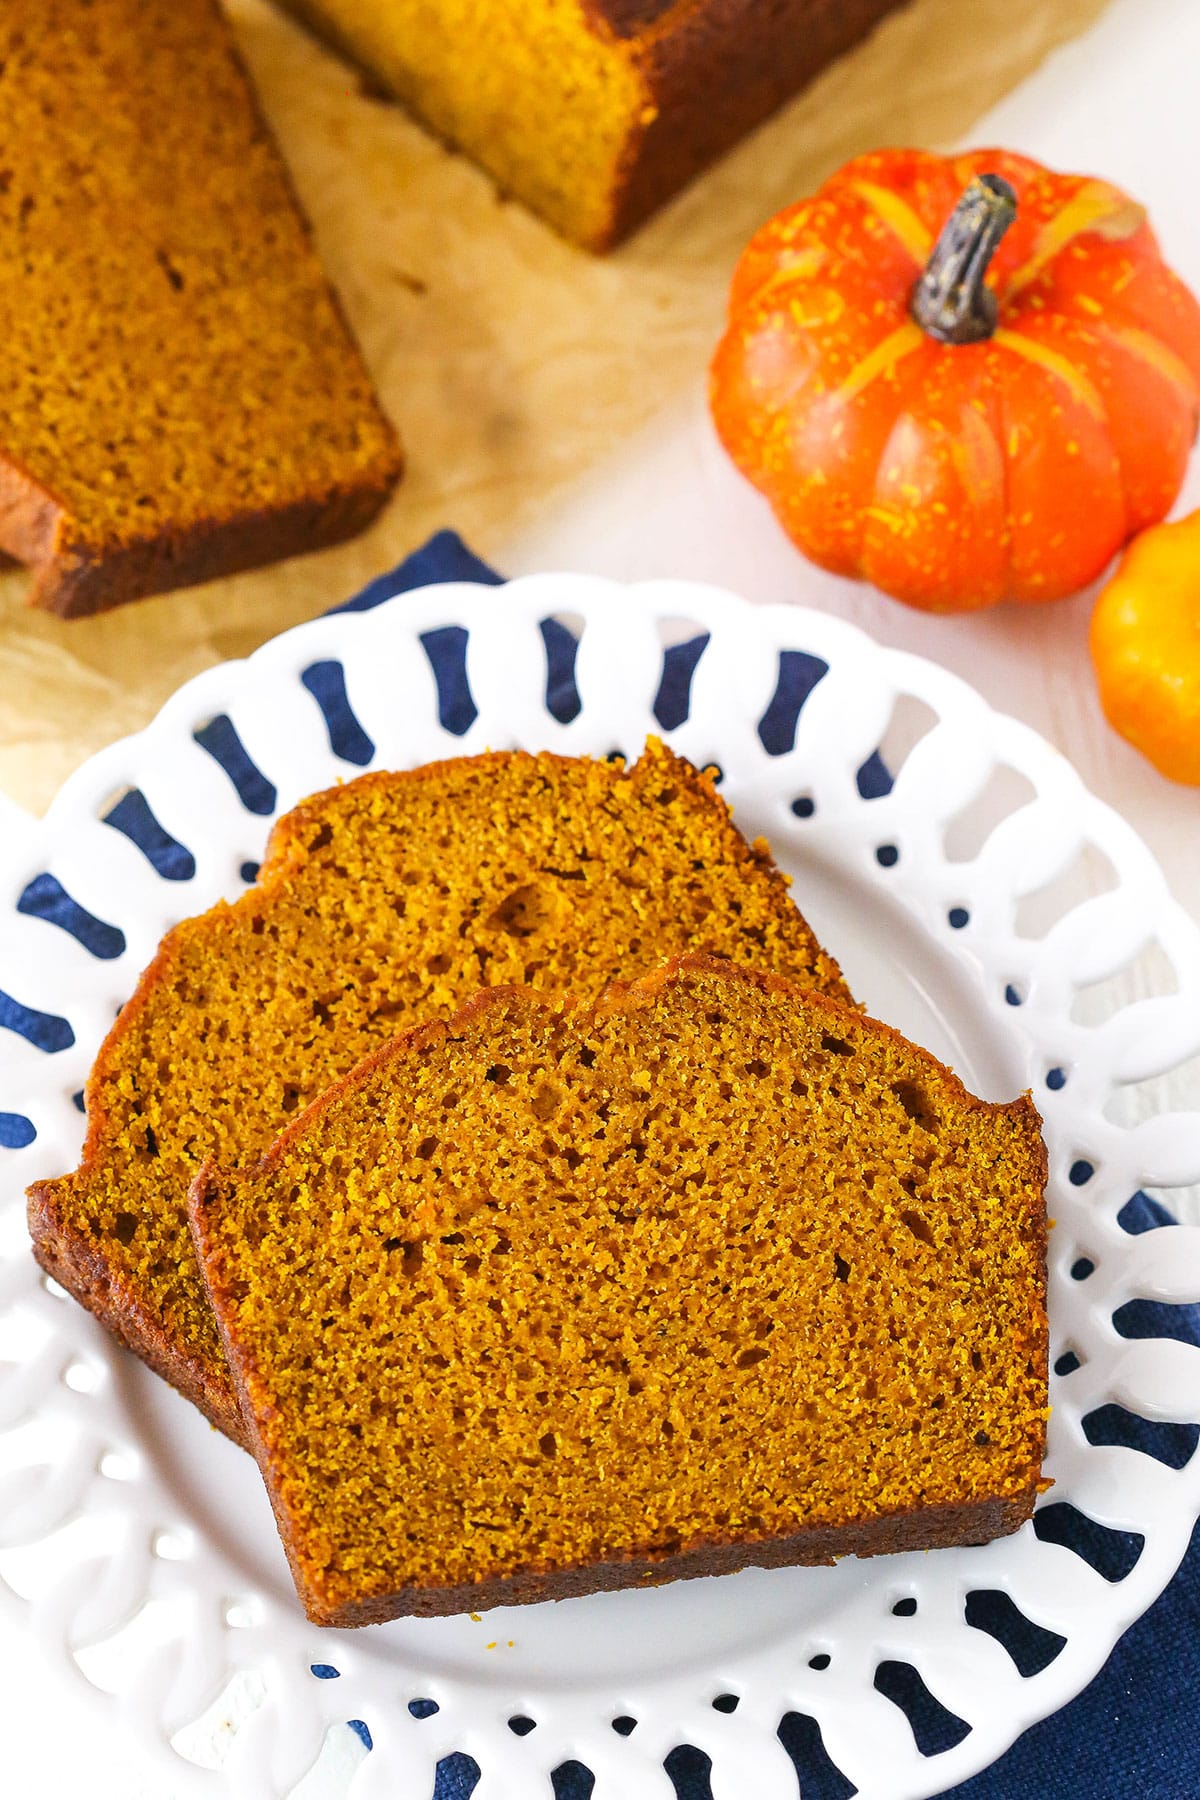 Two slices of Pumpkin Bread on a white plate next to a decorative pumpkin